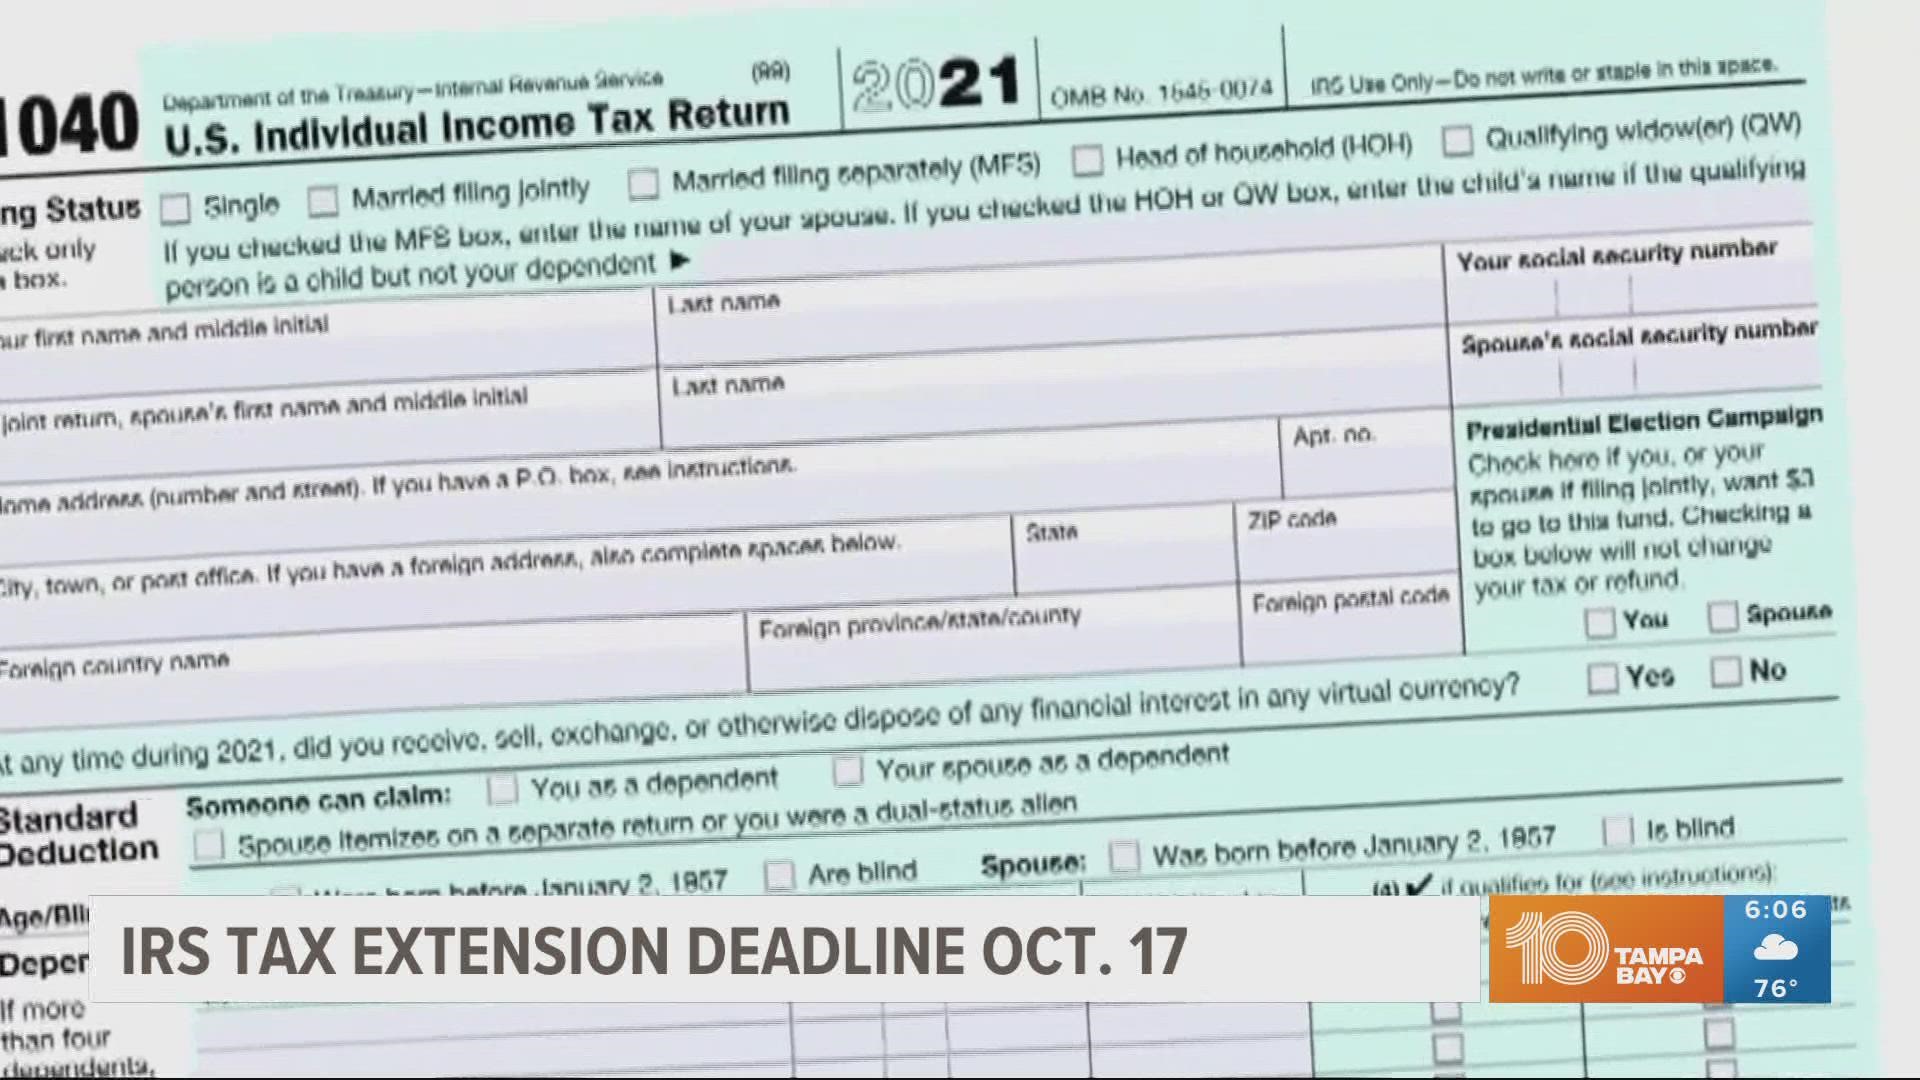 You have until Oct. 17, 2022, to file your 2021 income tax return if you requested an extension. The IRS encourages taxpayers to file electronically ASAP.